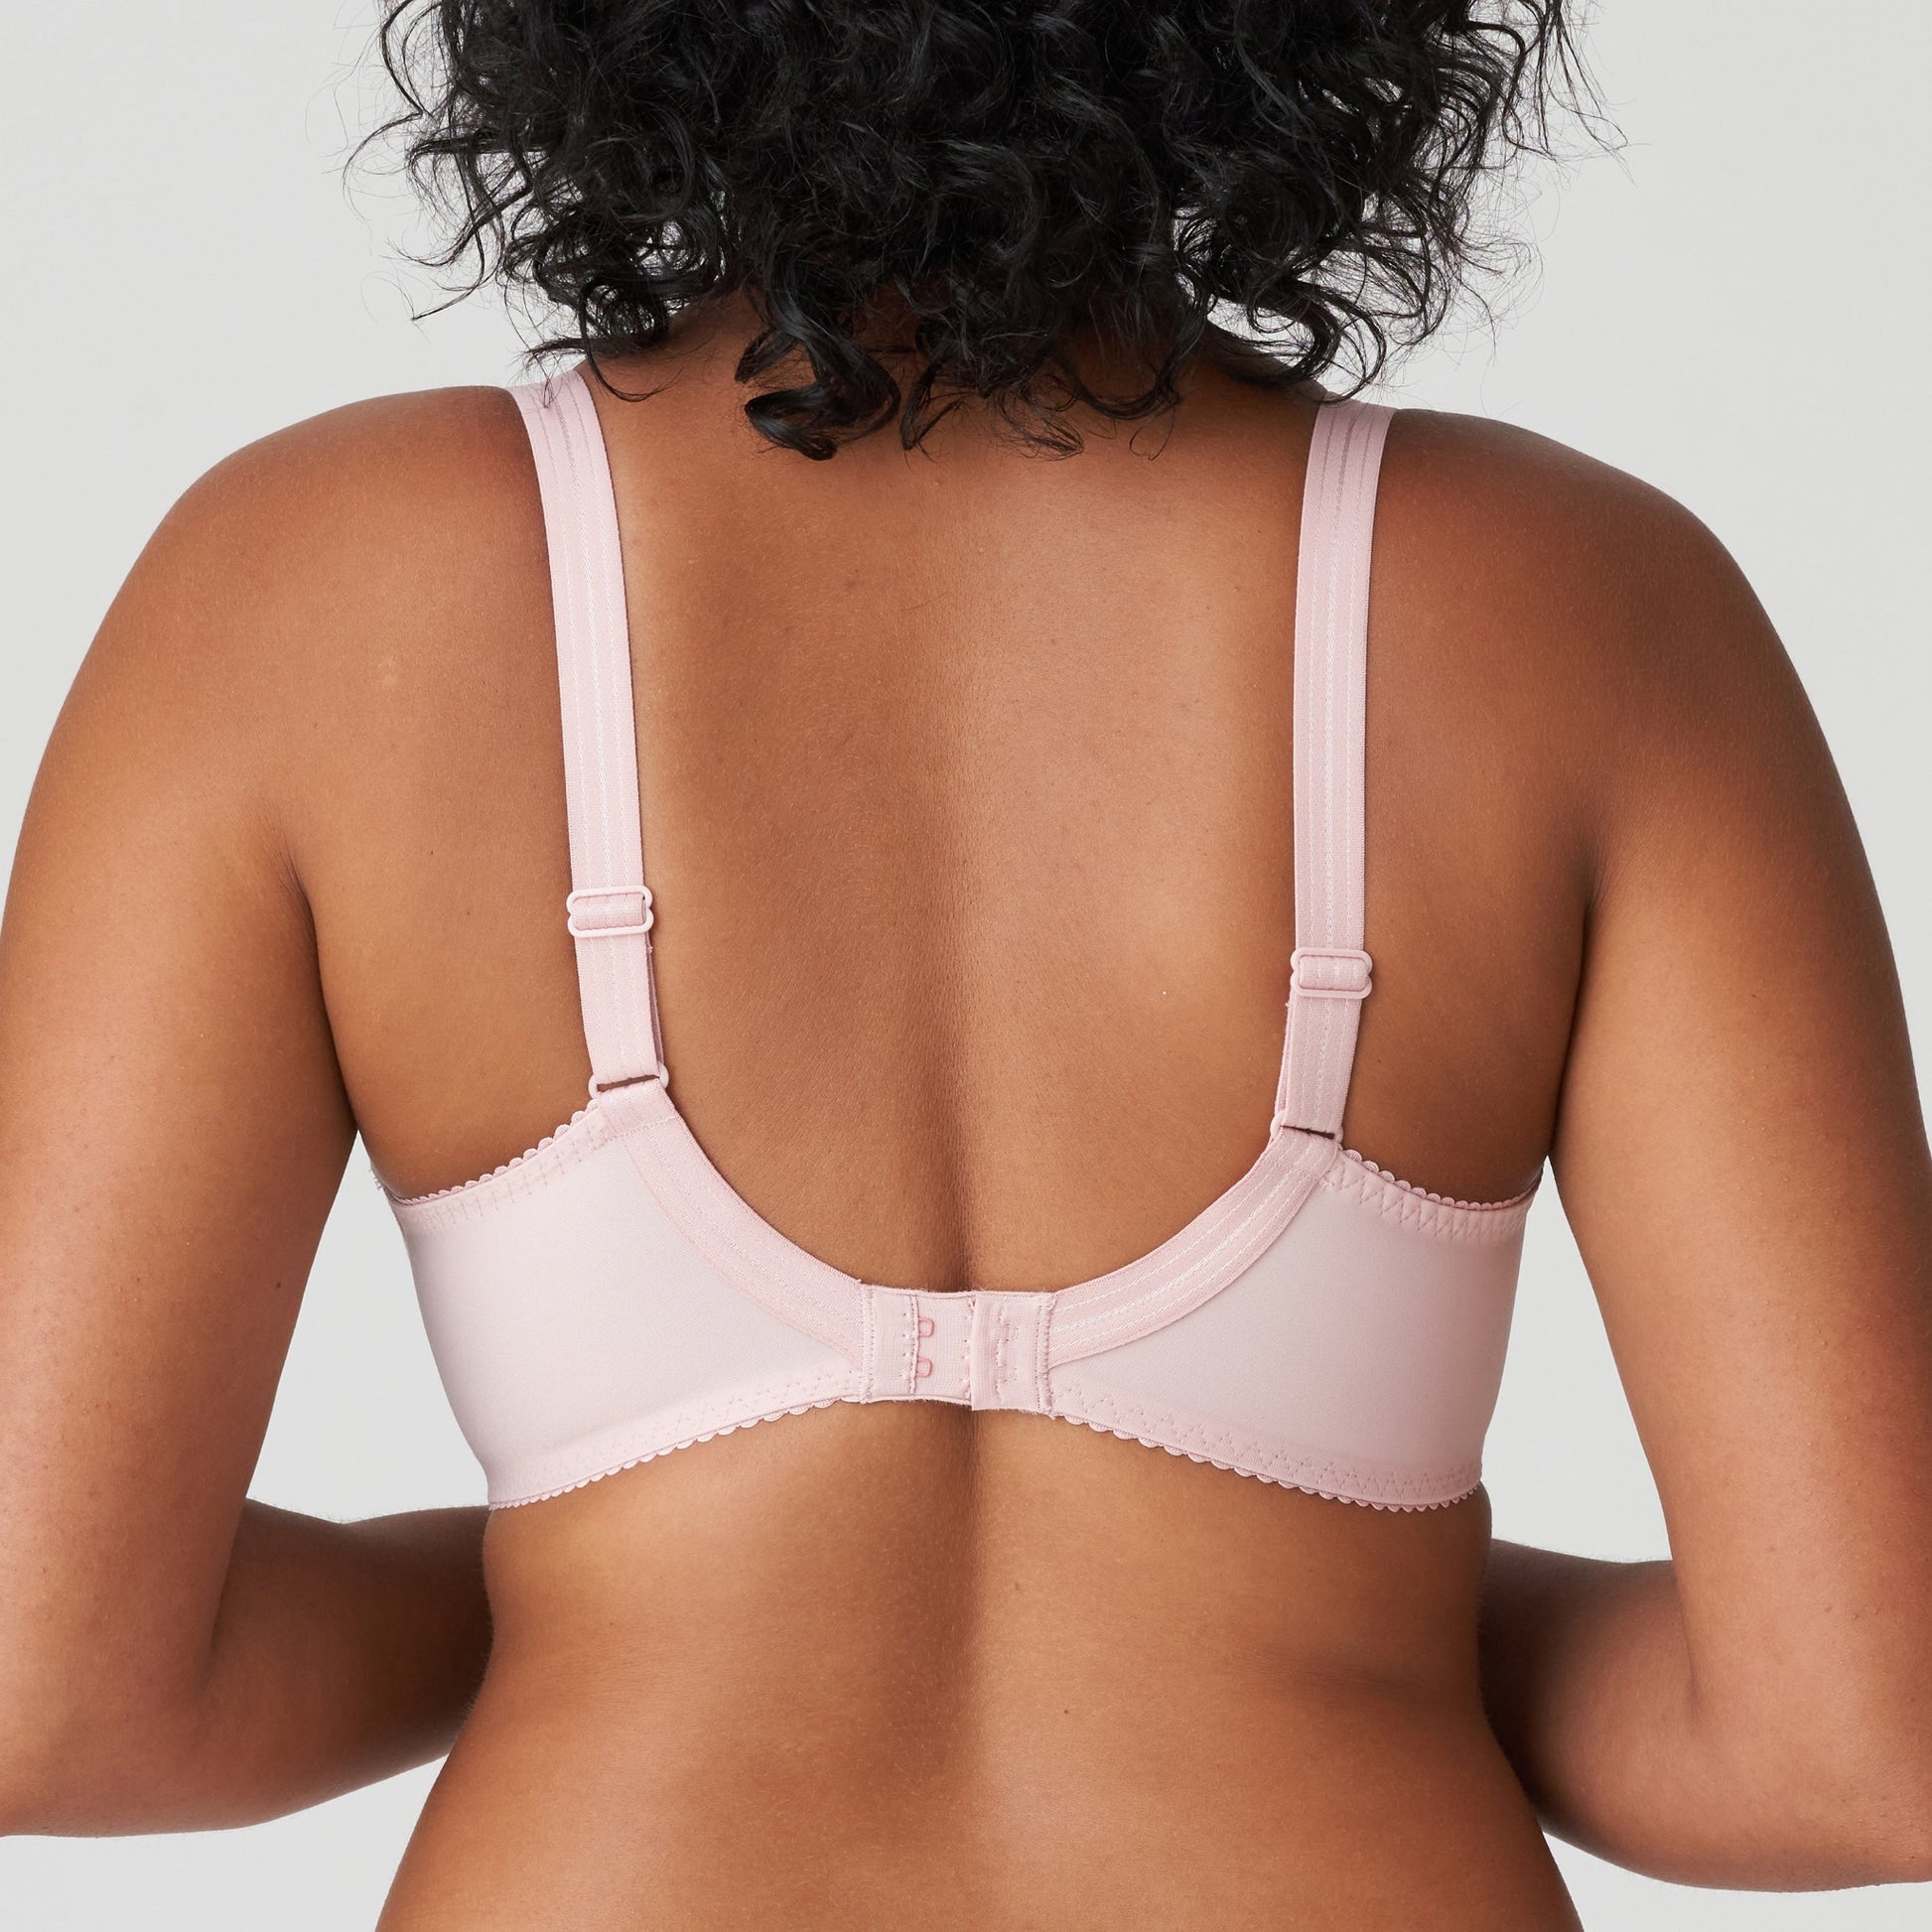 Back view of a woman wearing a supportive full cup underwire bra for large breasts in vintage pink by PrimaDanna.